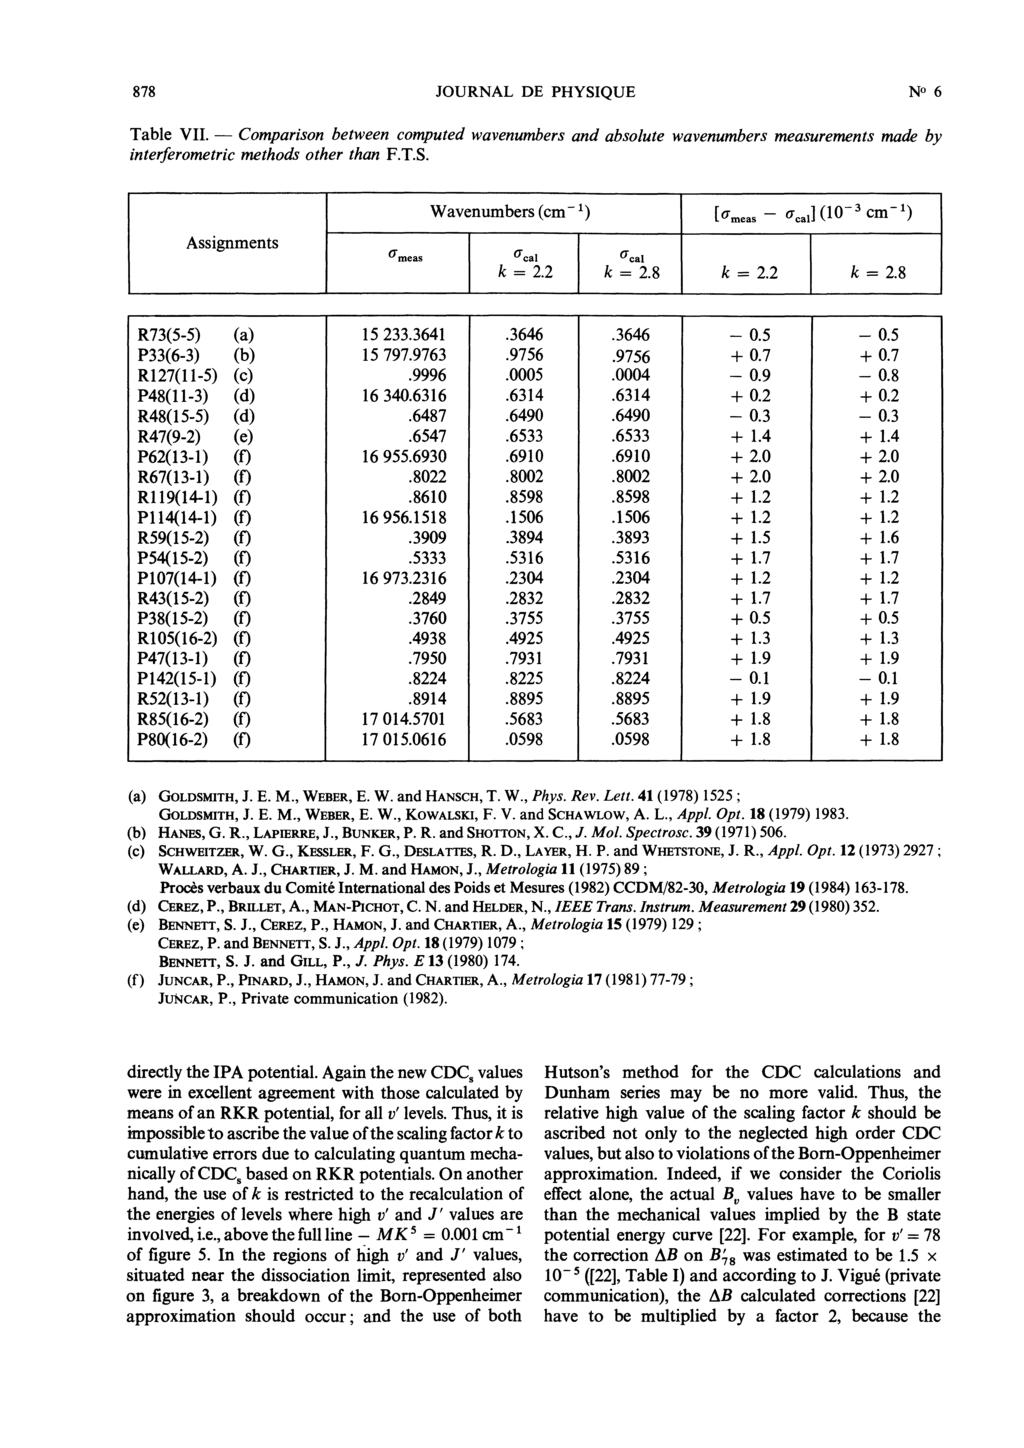 Comparison 878 Table VII. between computed wavenumbers and absolute wavenumbers measurements made by interferometric methods other than F.T.S. (a) GOLDSMITH, J. E. M., WEBER, E. W. and HANSCH, T. W., Phys.